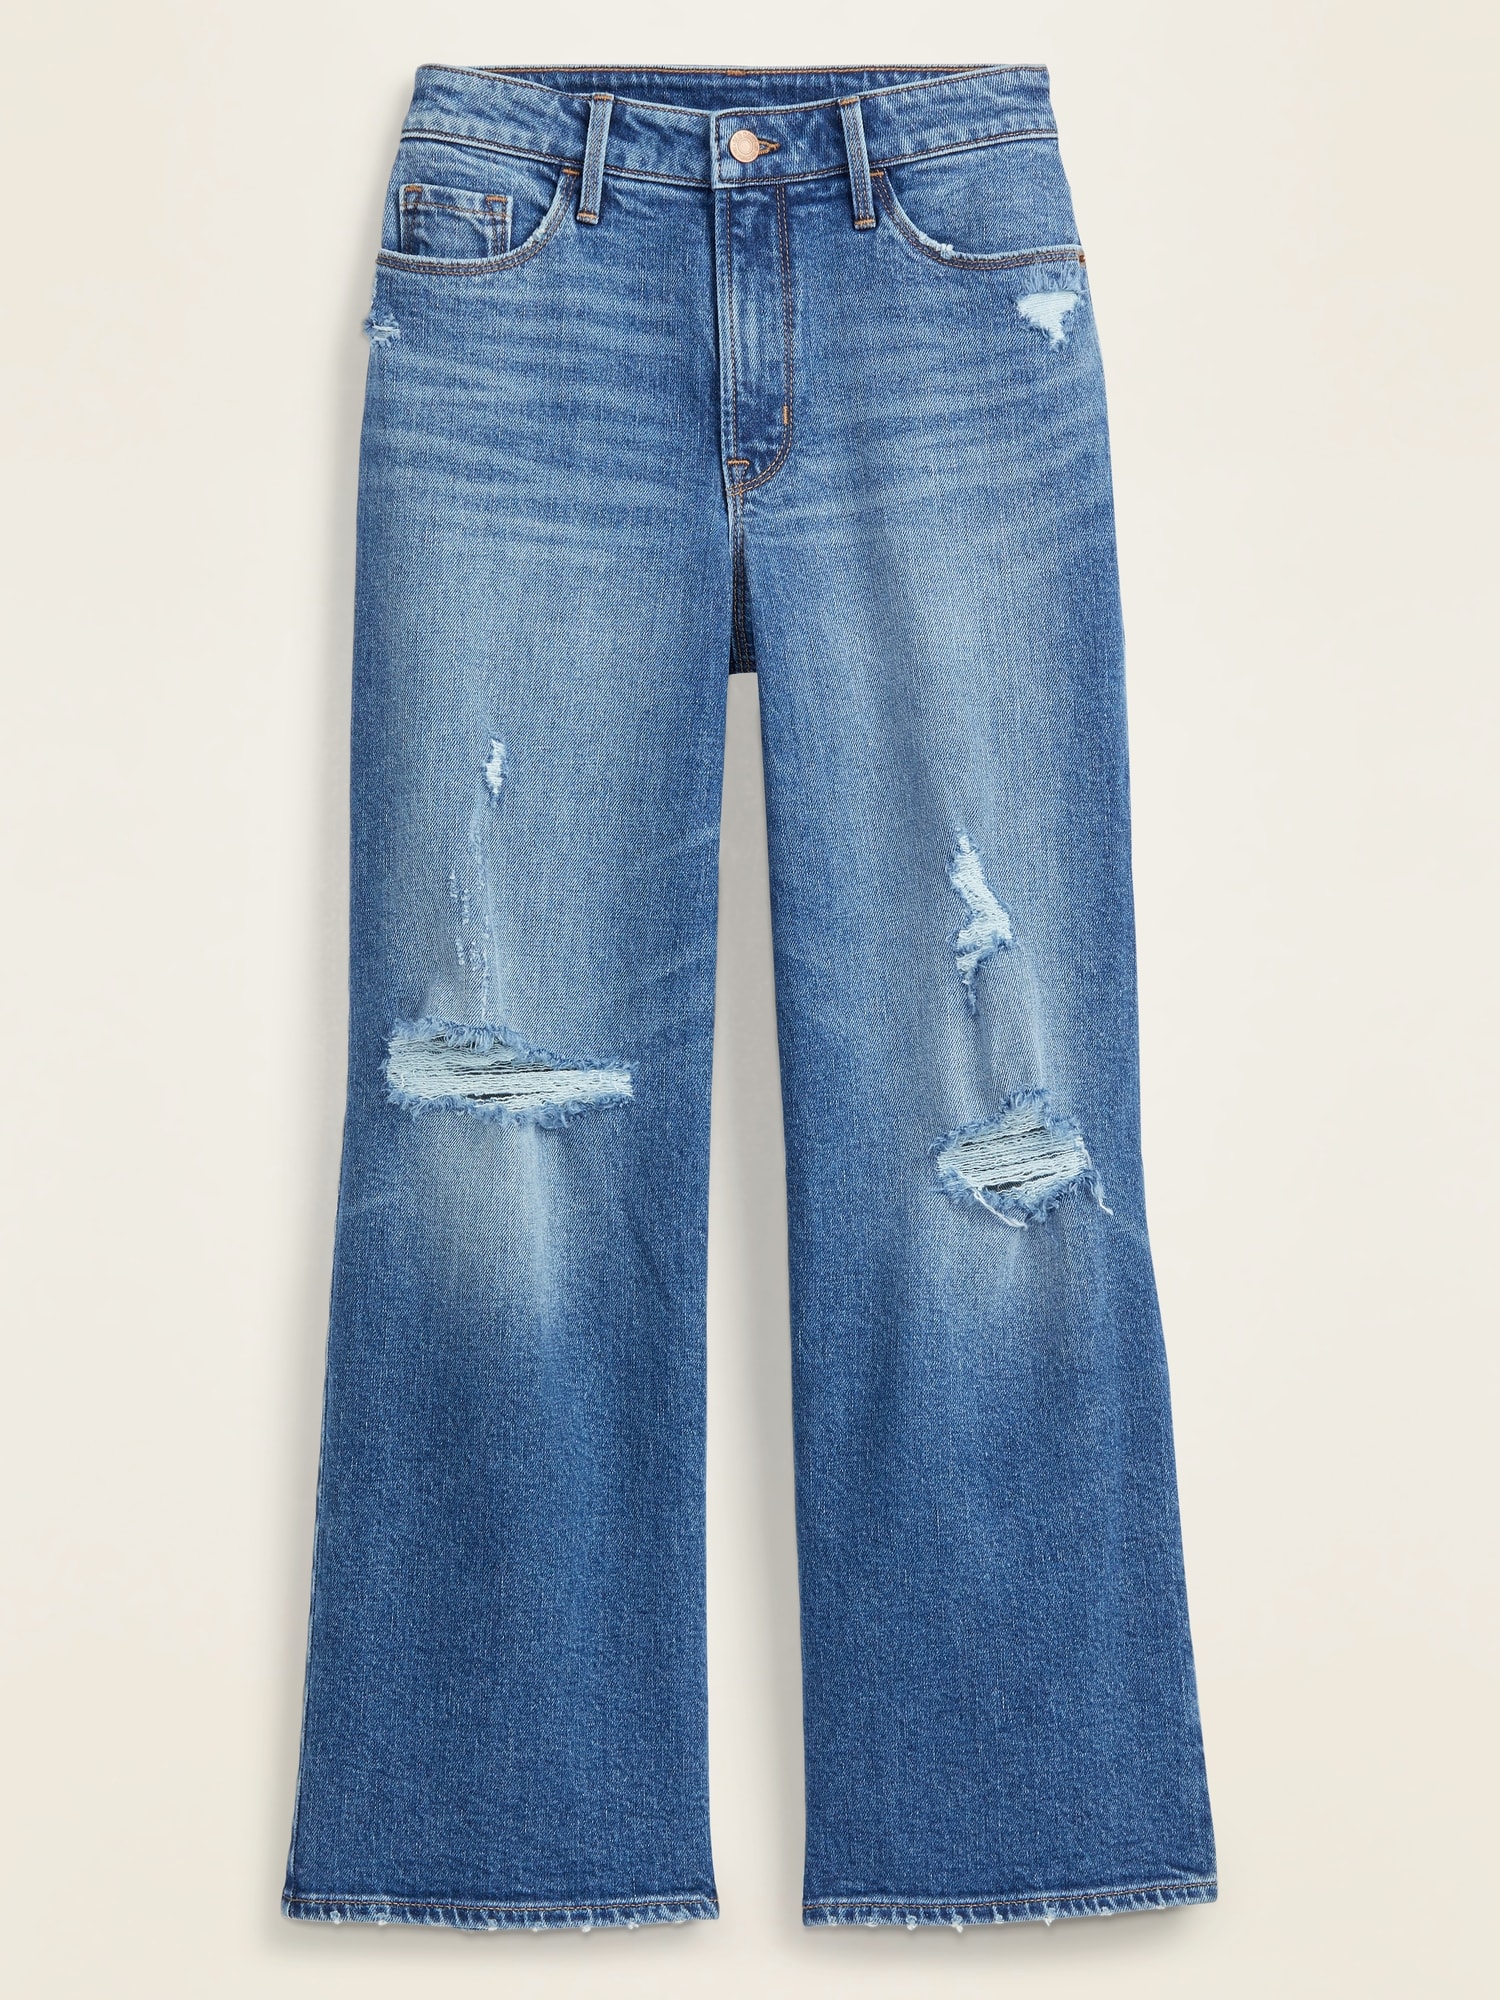 extra long womens jeans